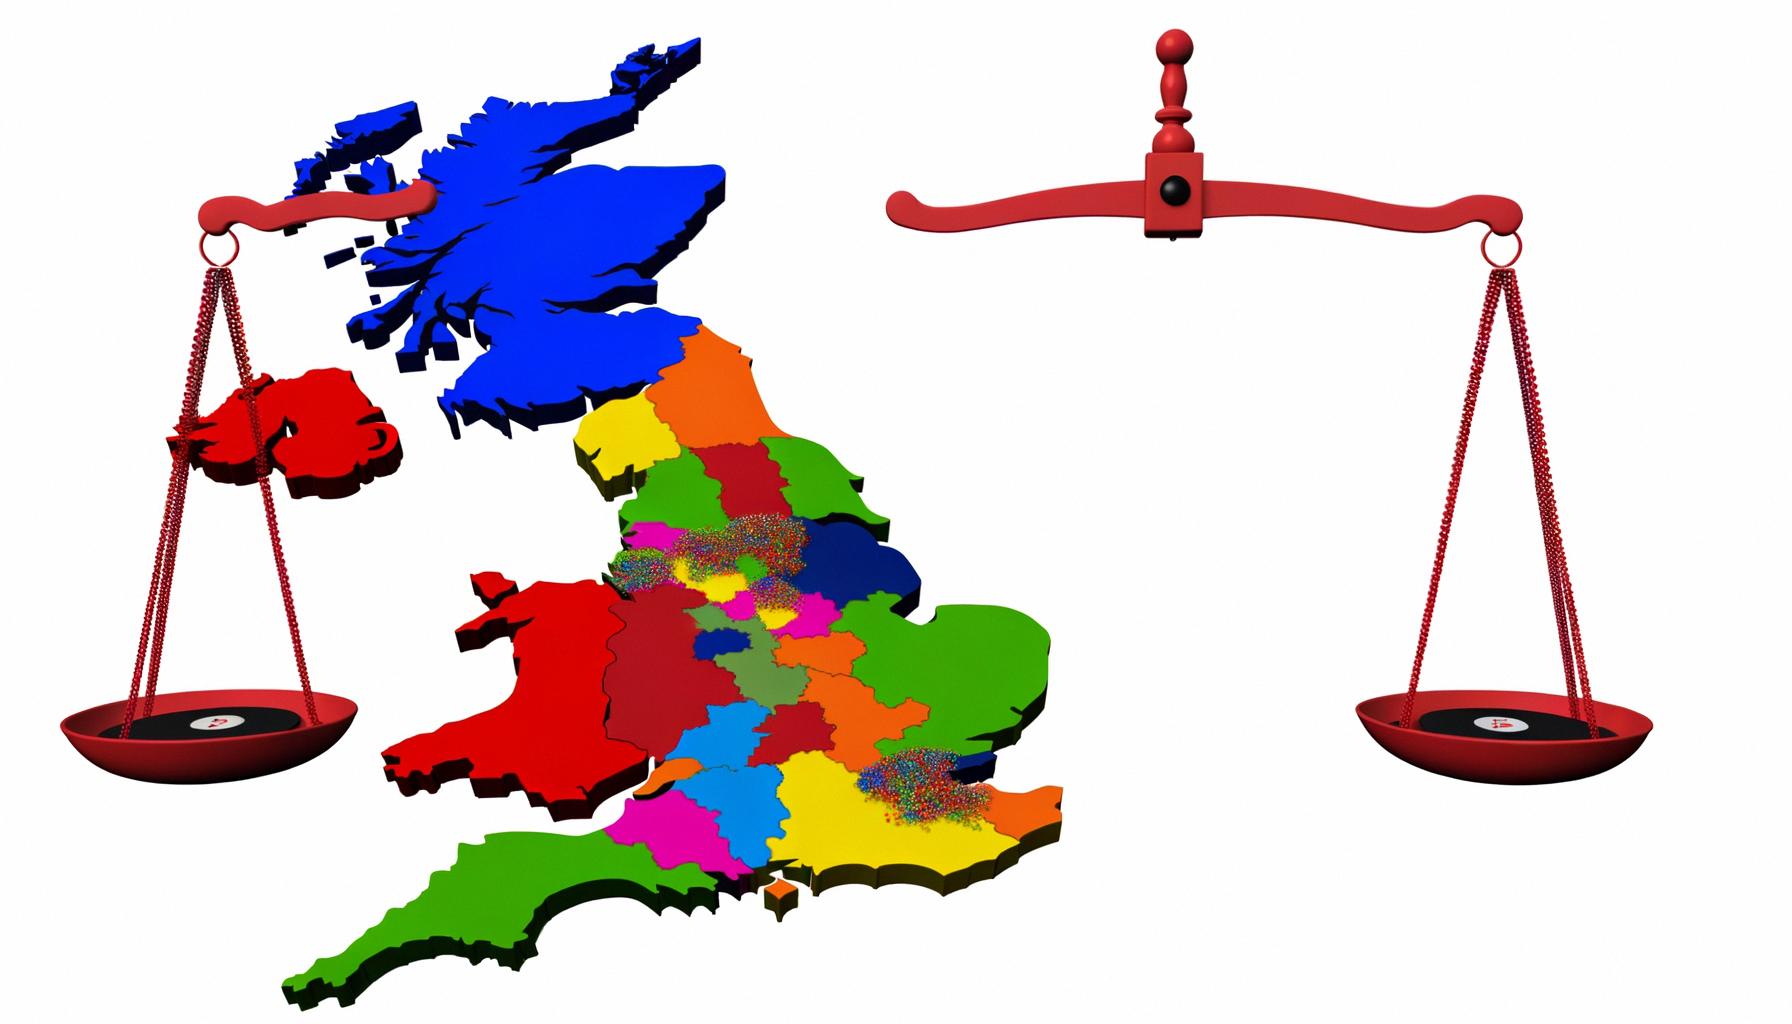 UK political fragmentation affects 2024 general election outcomes